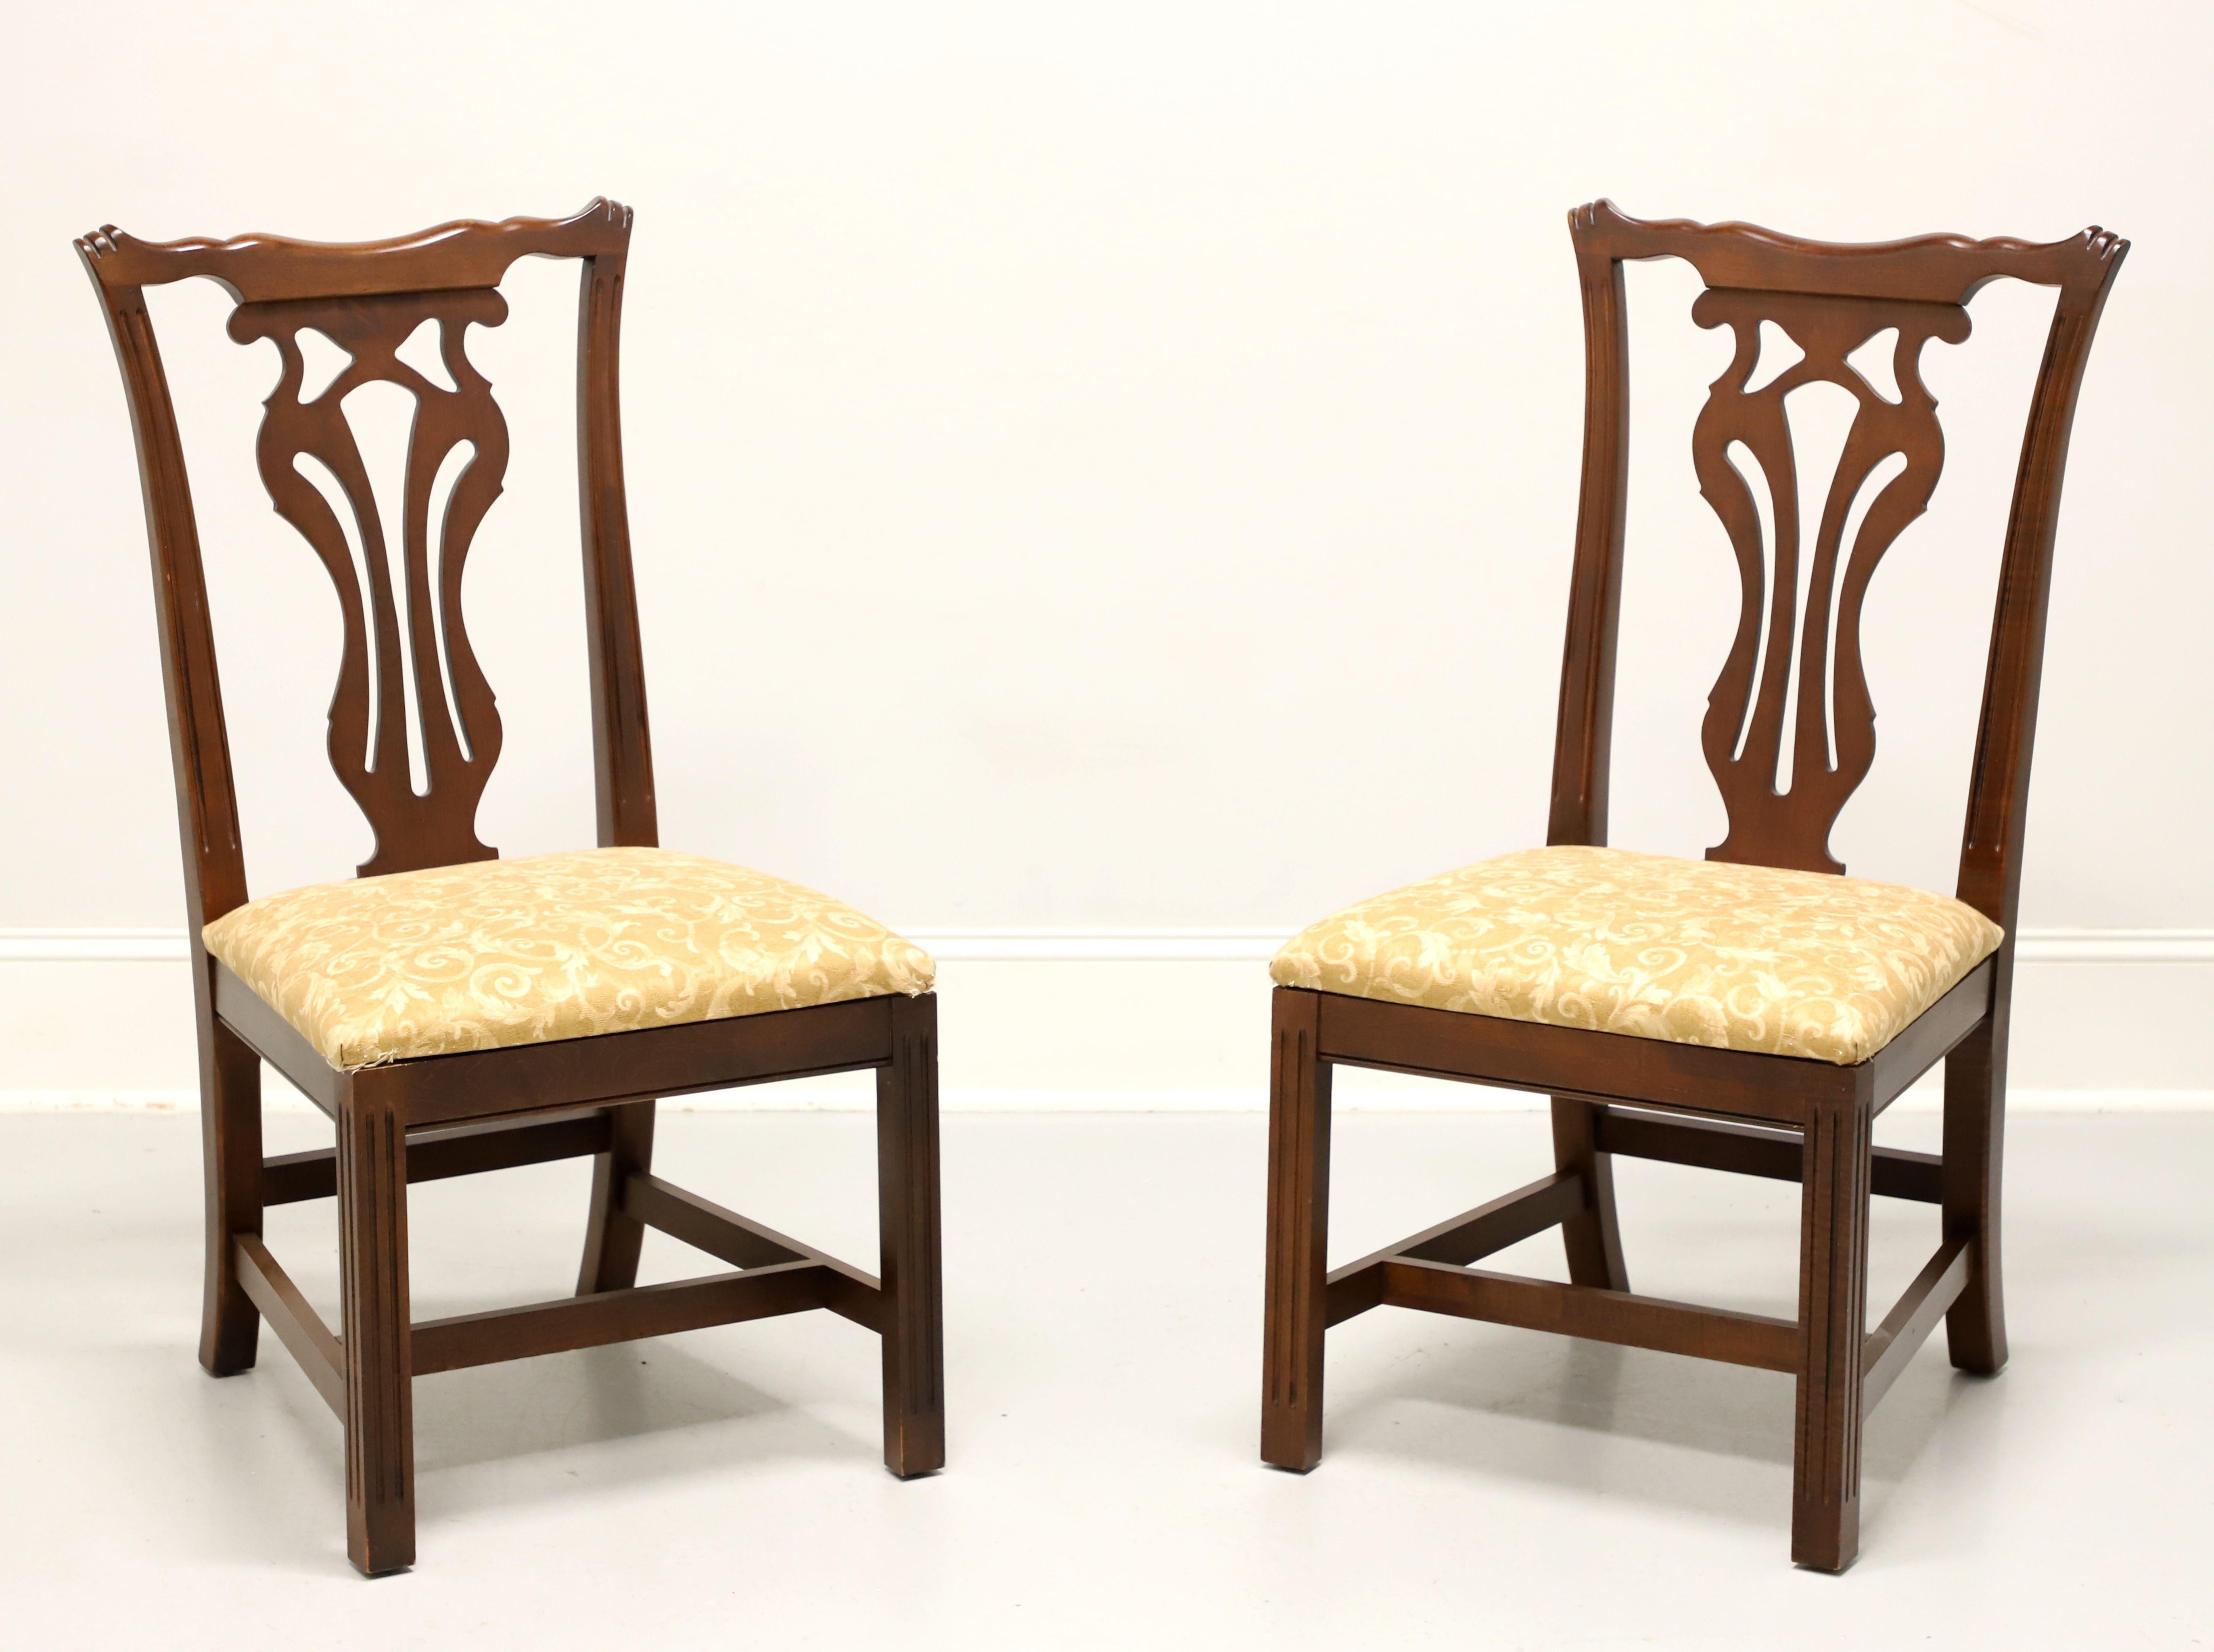 KNOB CREEK Mahogany Chippendale Dining Side Chairs - Pair B For Sale 7